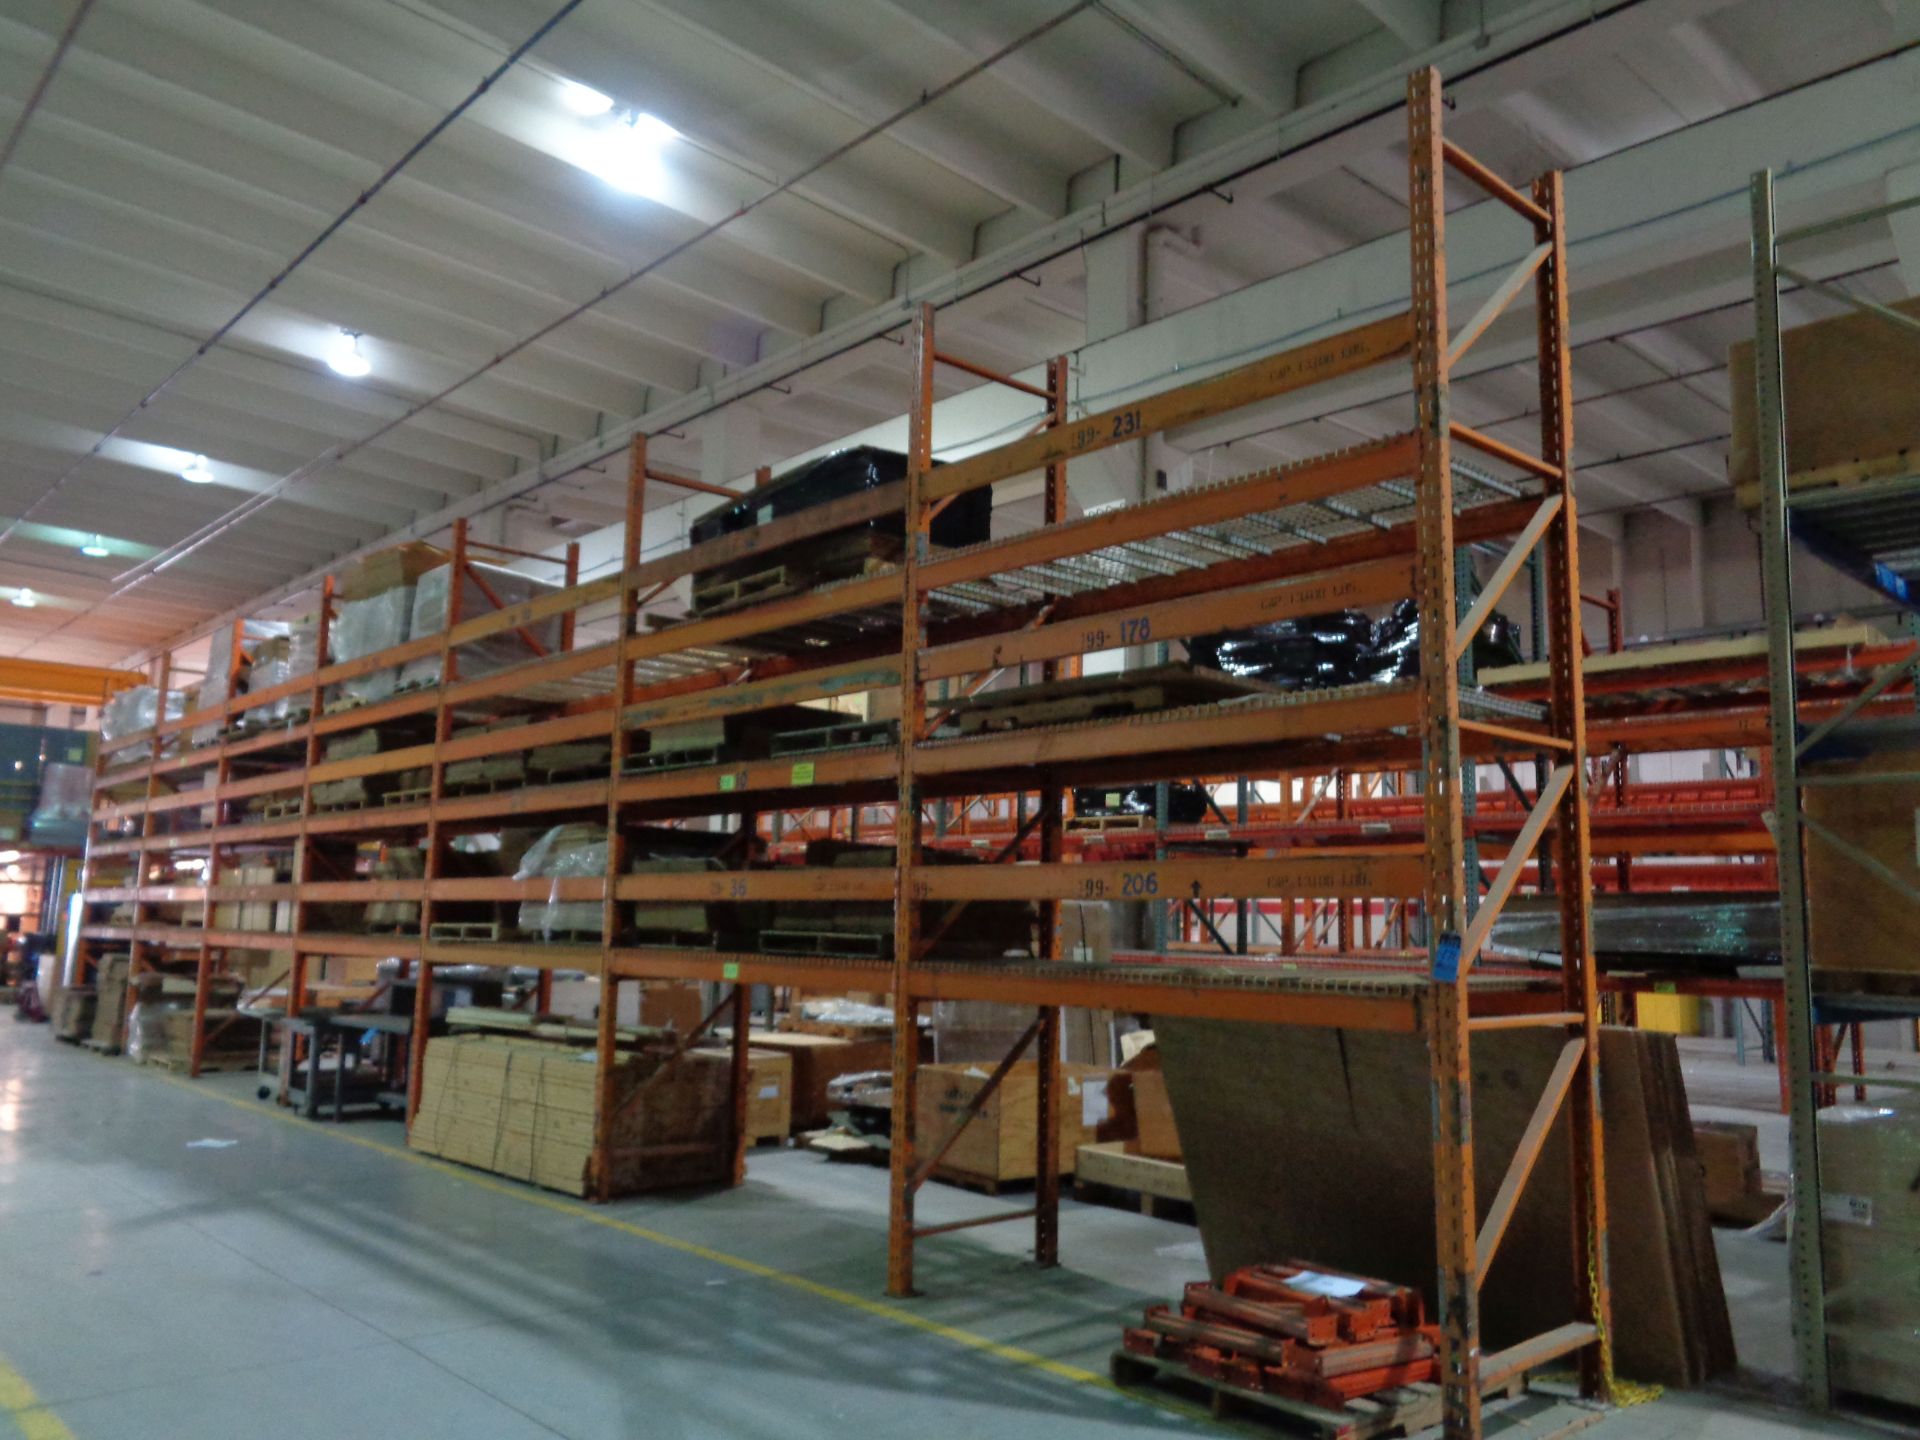 SECTIONS 42" X 108" X 16' HIGH PALLET RACK WITH WIRE DECKING, (6) SHELVES, 6" WIDE STEP BEAMS